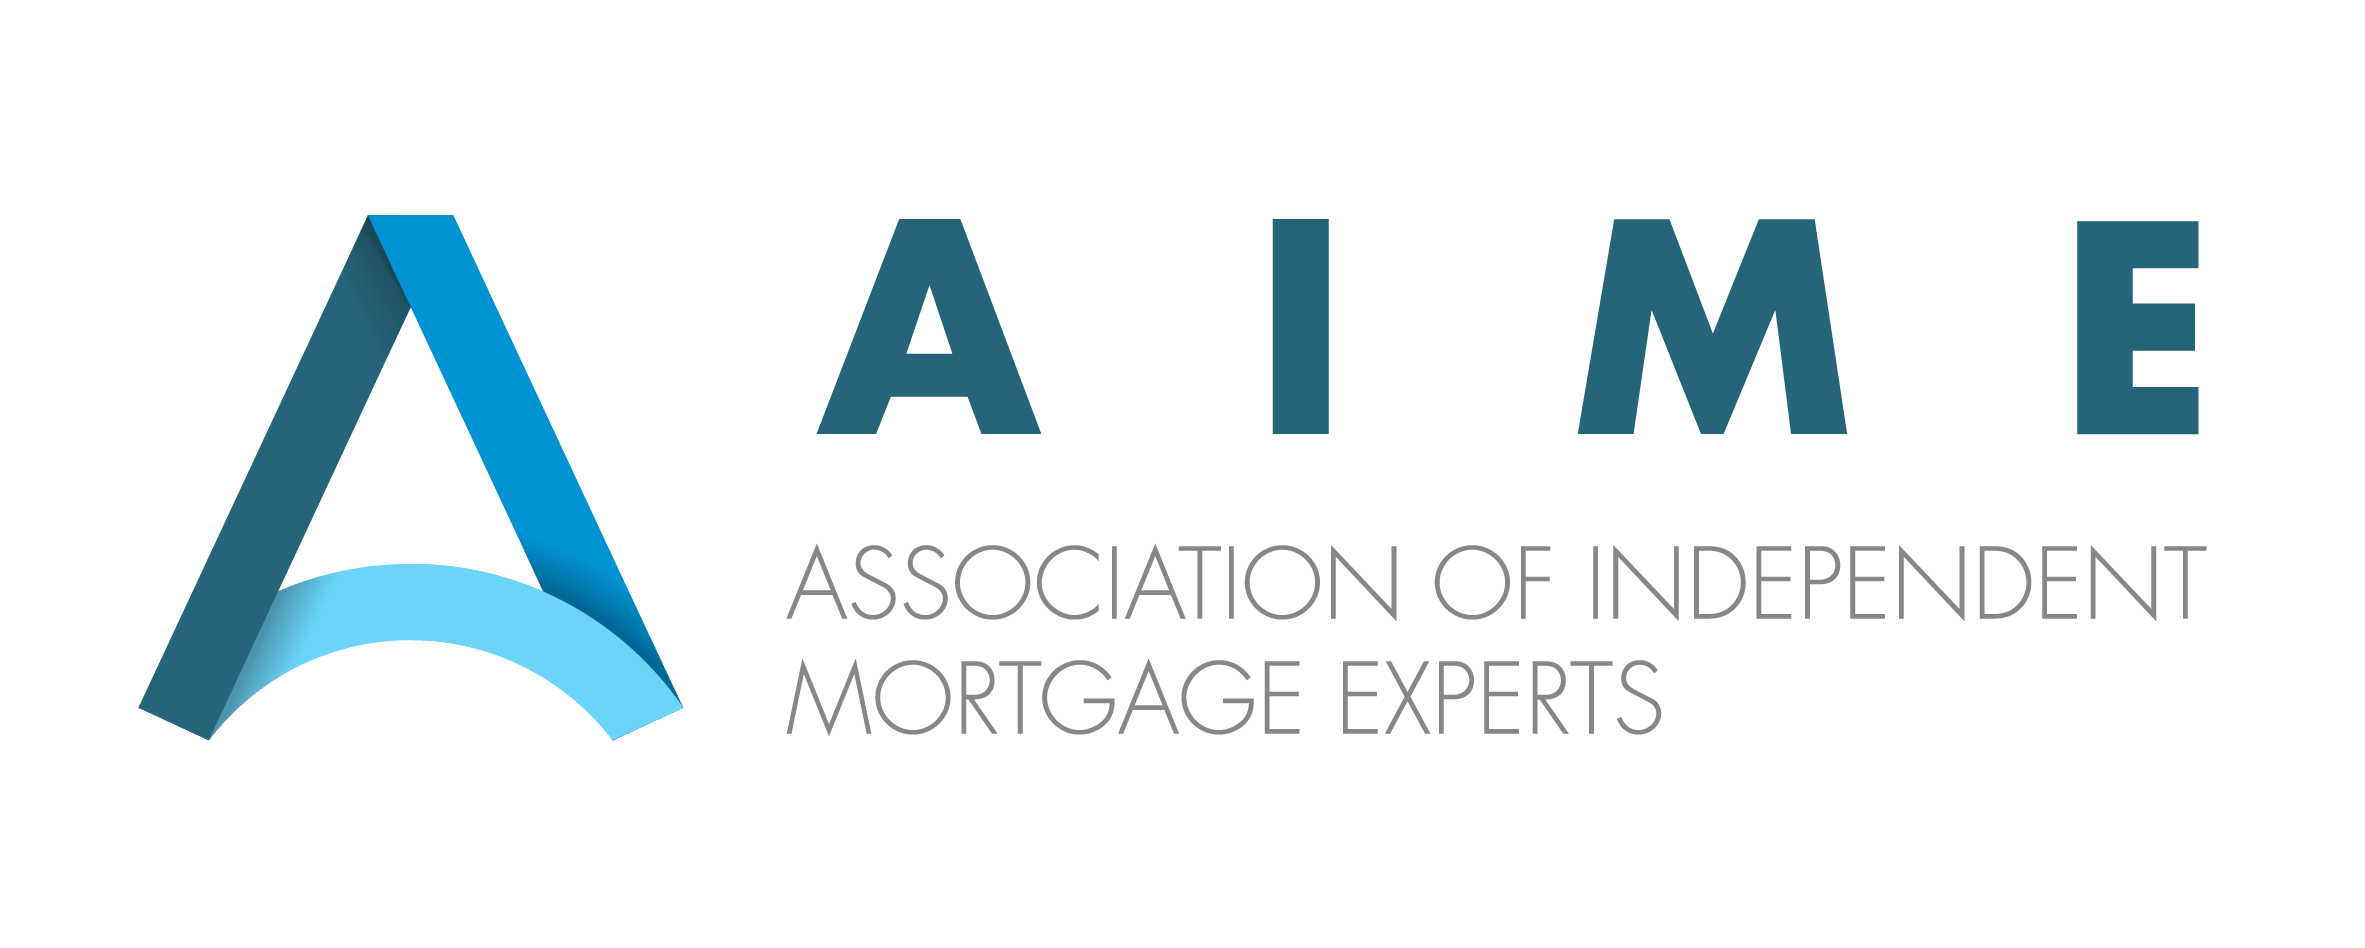 AIME, Association of Independent Mortgage Experts, Mortgage Broker, Mortgage Professional